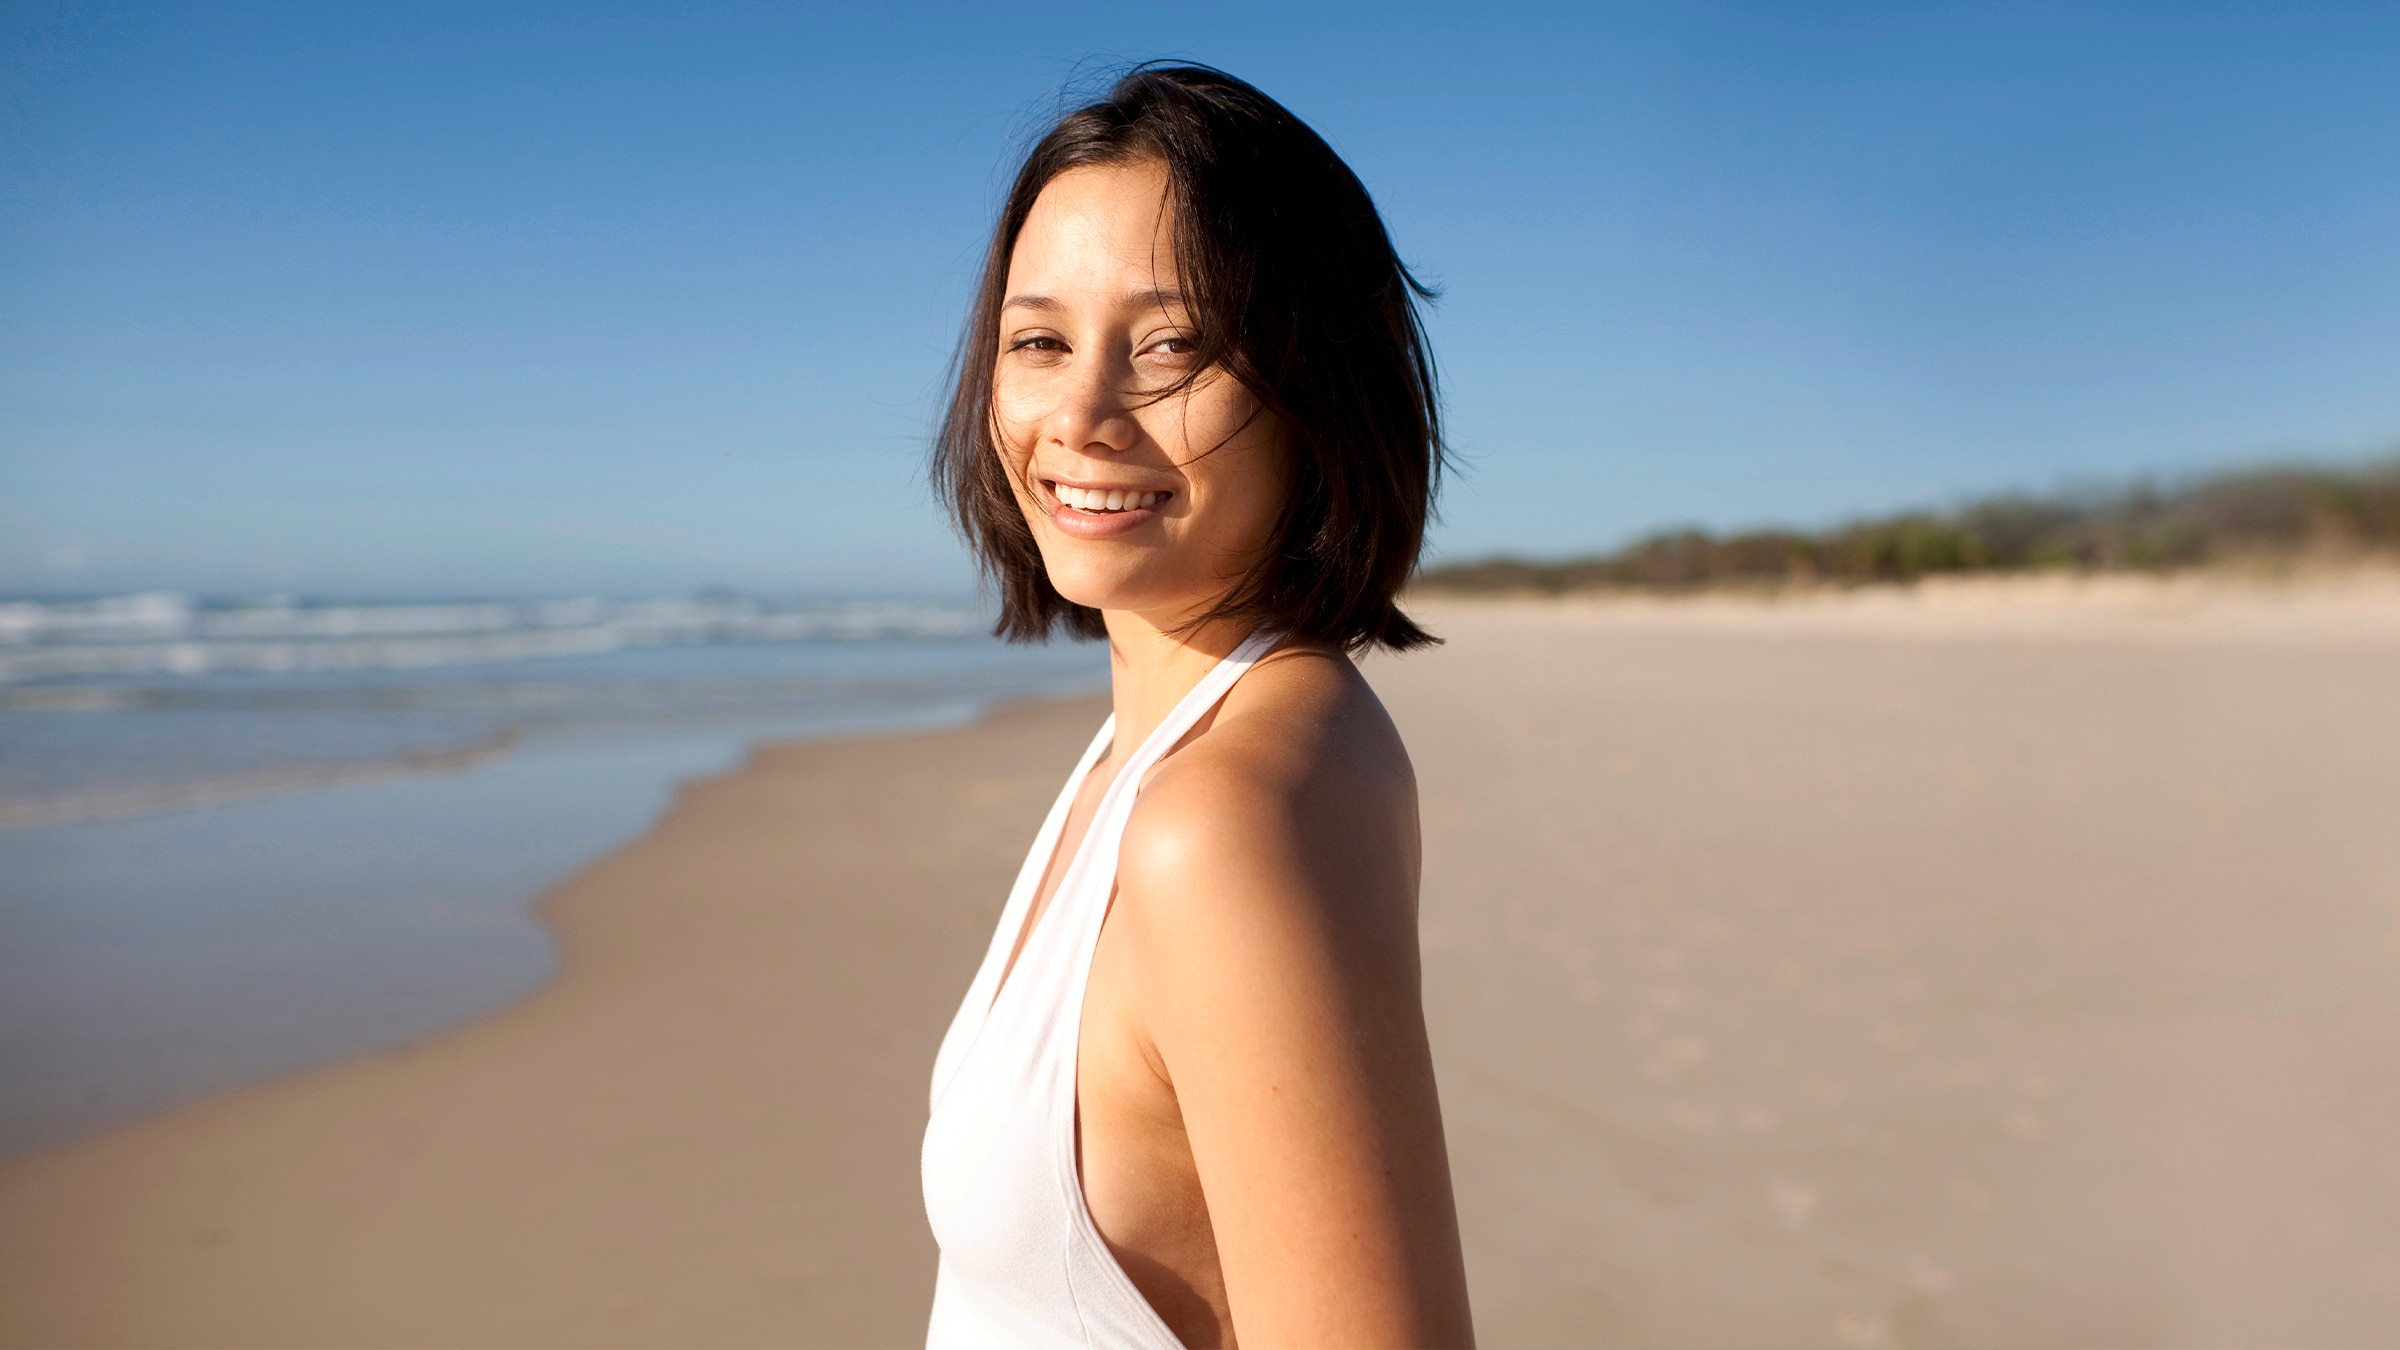 A person is shown standing on a beach and smiling. They are turned to the side and facing the camera.